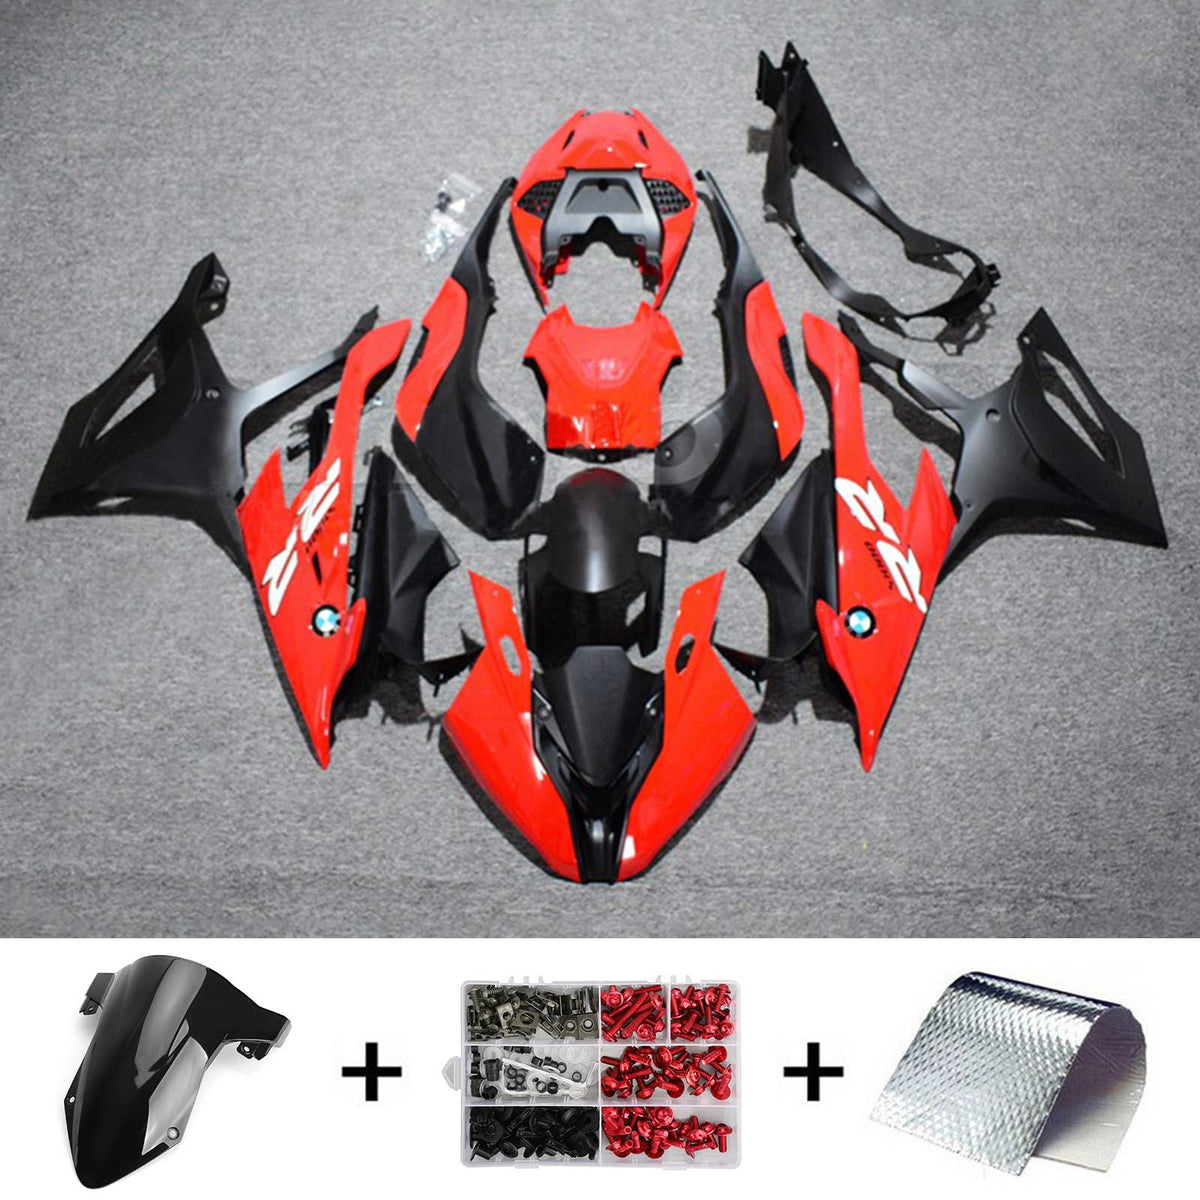 Amotopart 2019-2022 Kit carena racing BMW S1000RR/M1000RR Rosso Nero